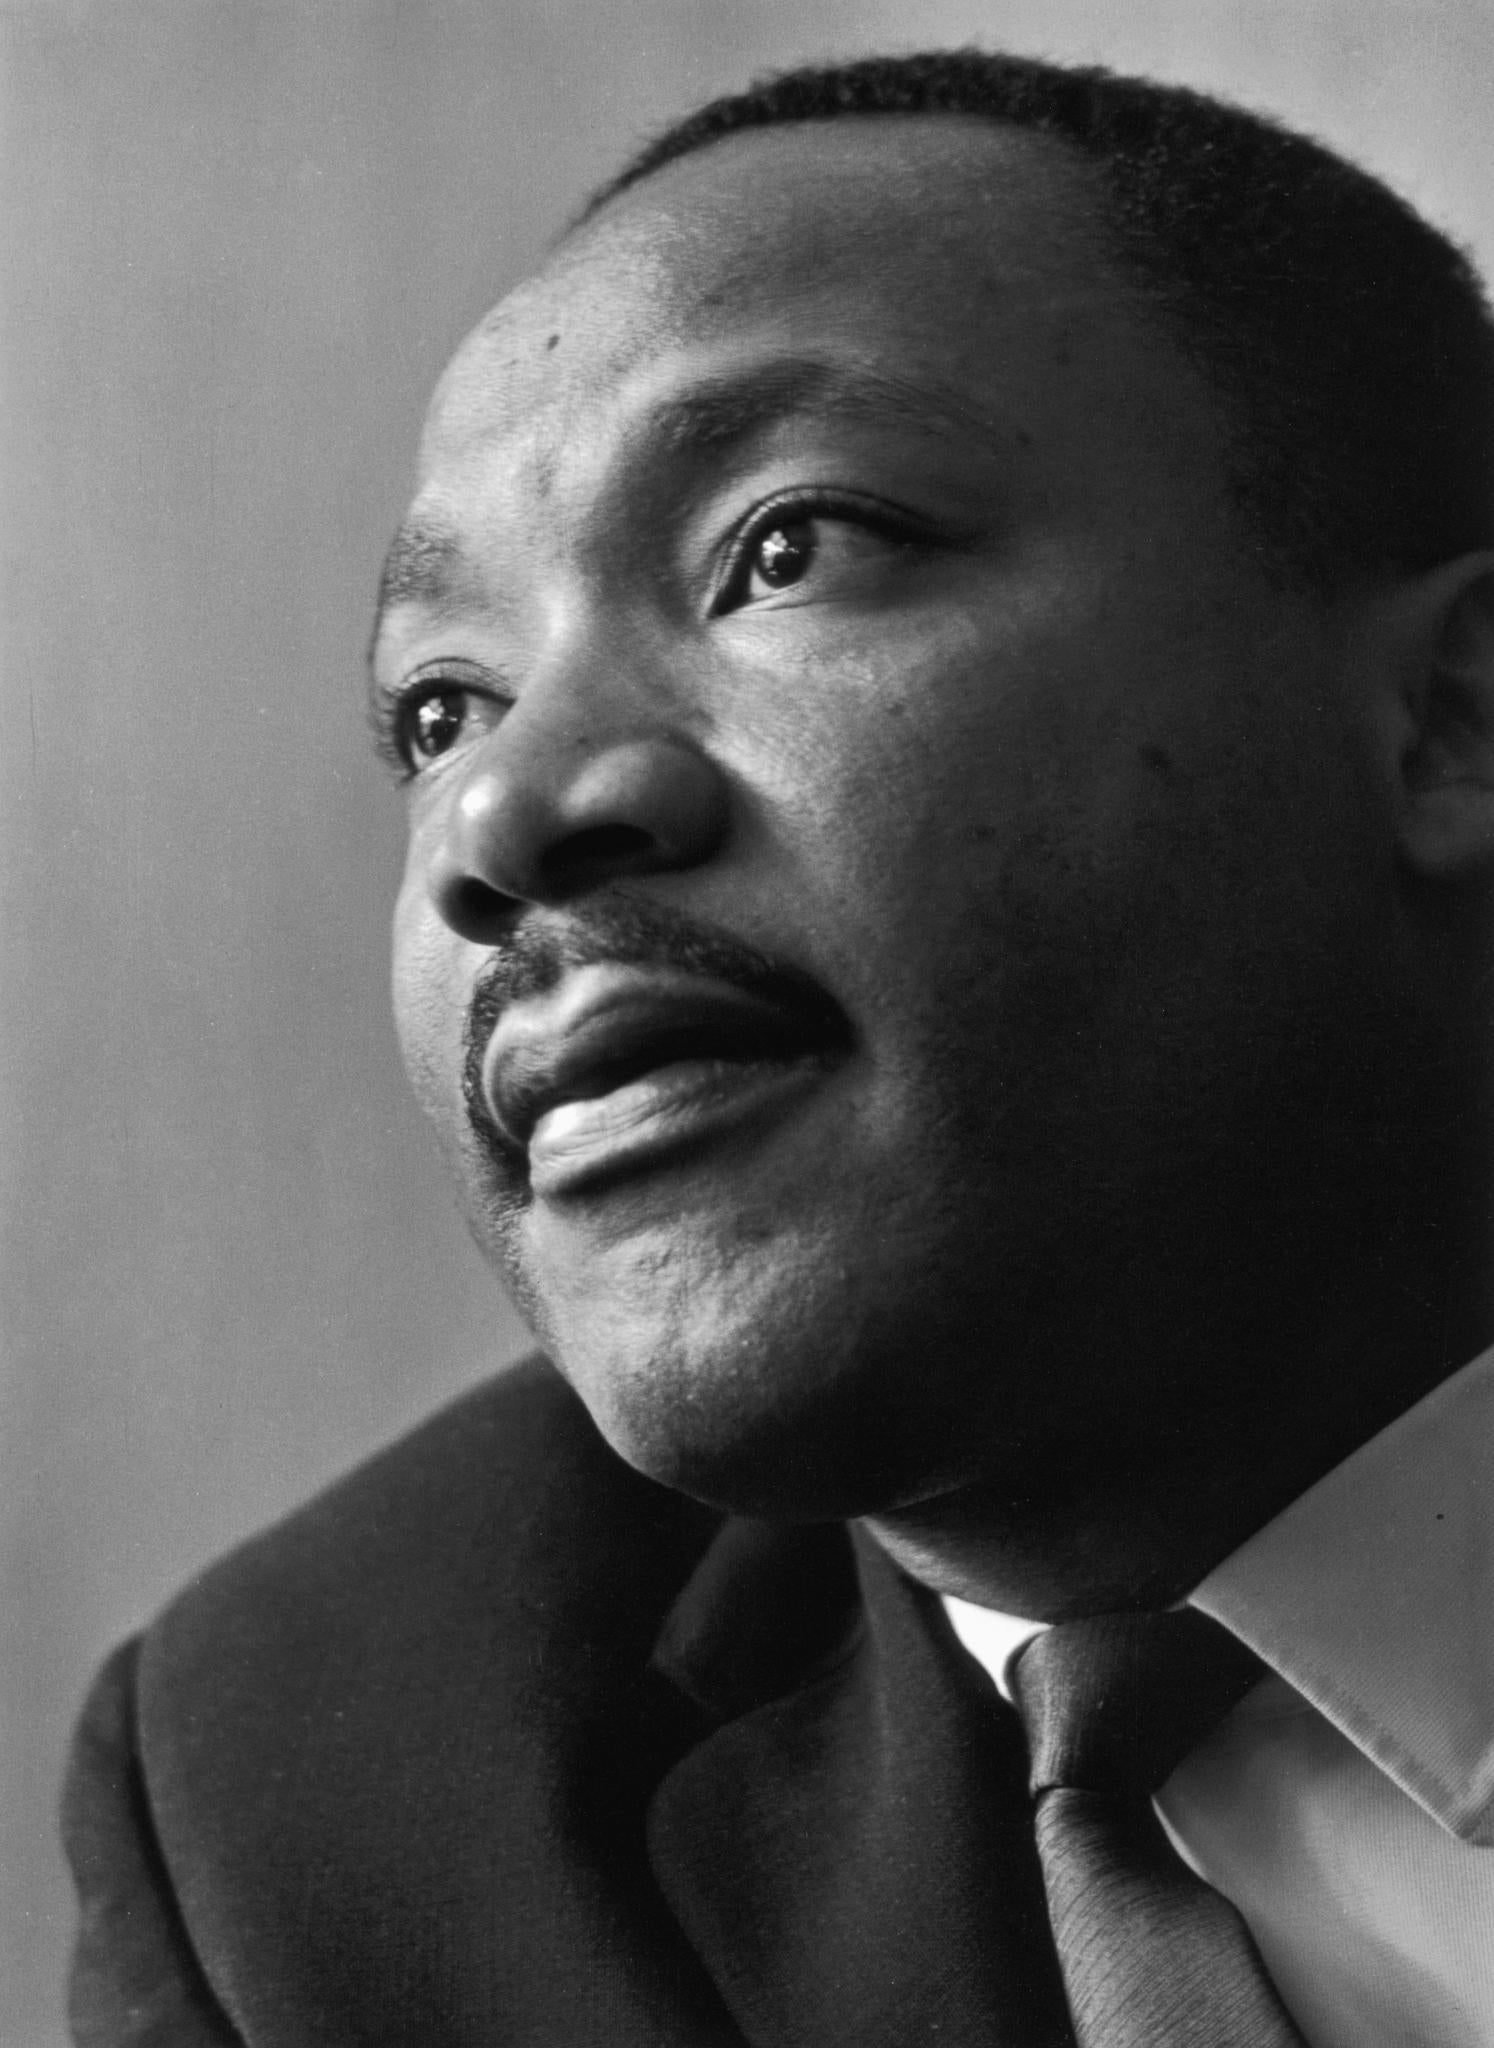 The JFK Files Offer A Glimpse Of The Martin Luther King Jr. Lies Created By The FBI
